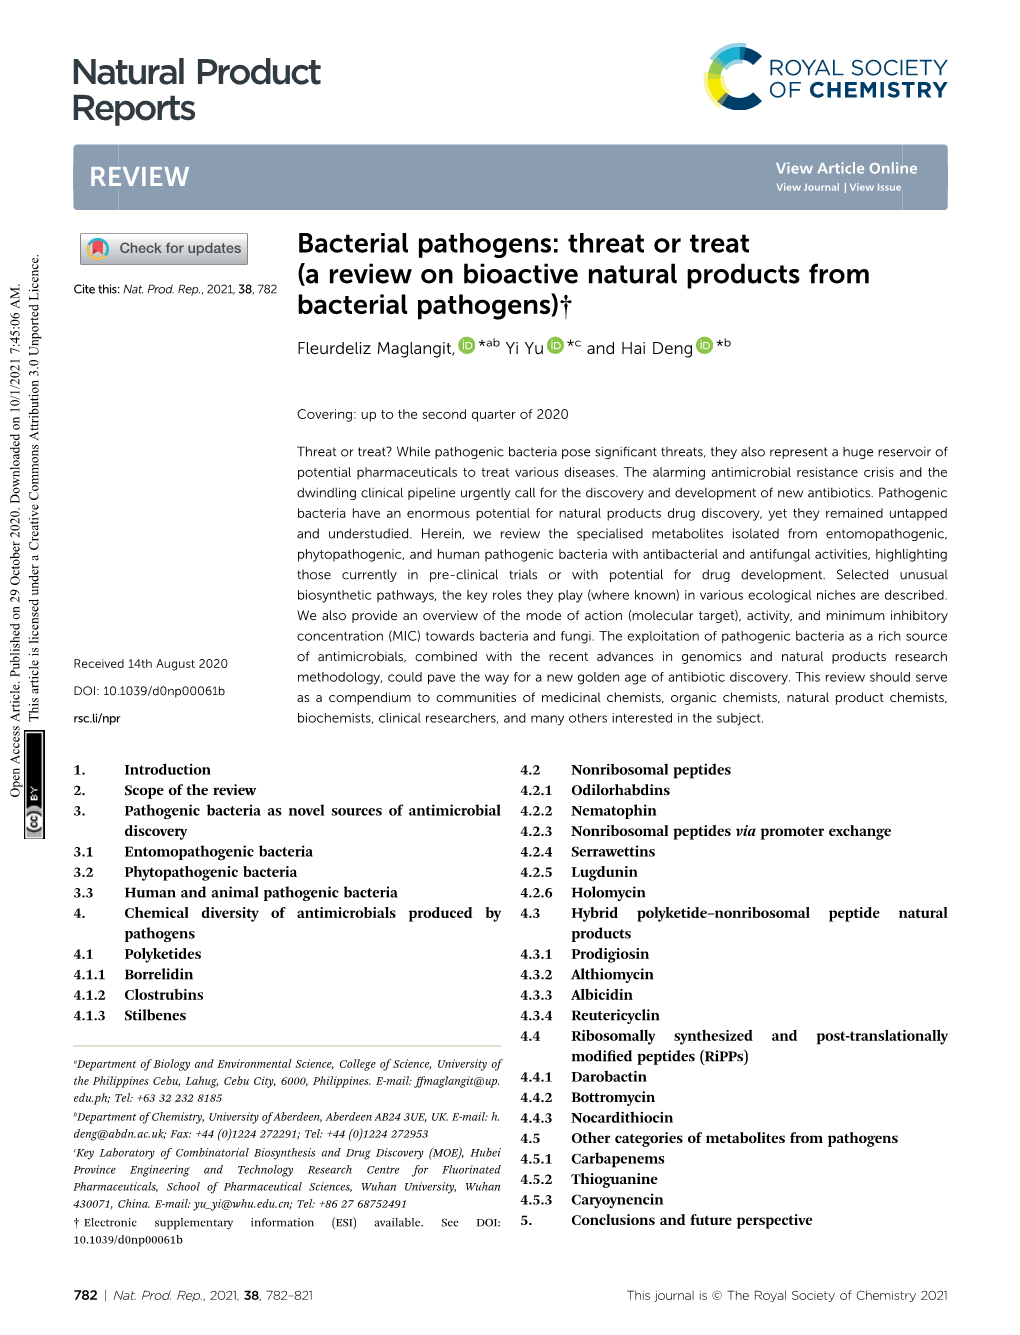 A Review on Bioactive Natural Products from Bacterial Pathogens